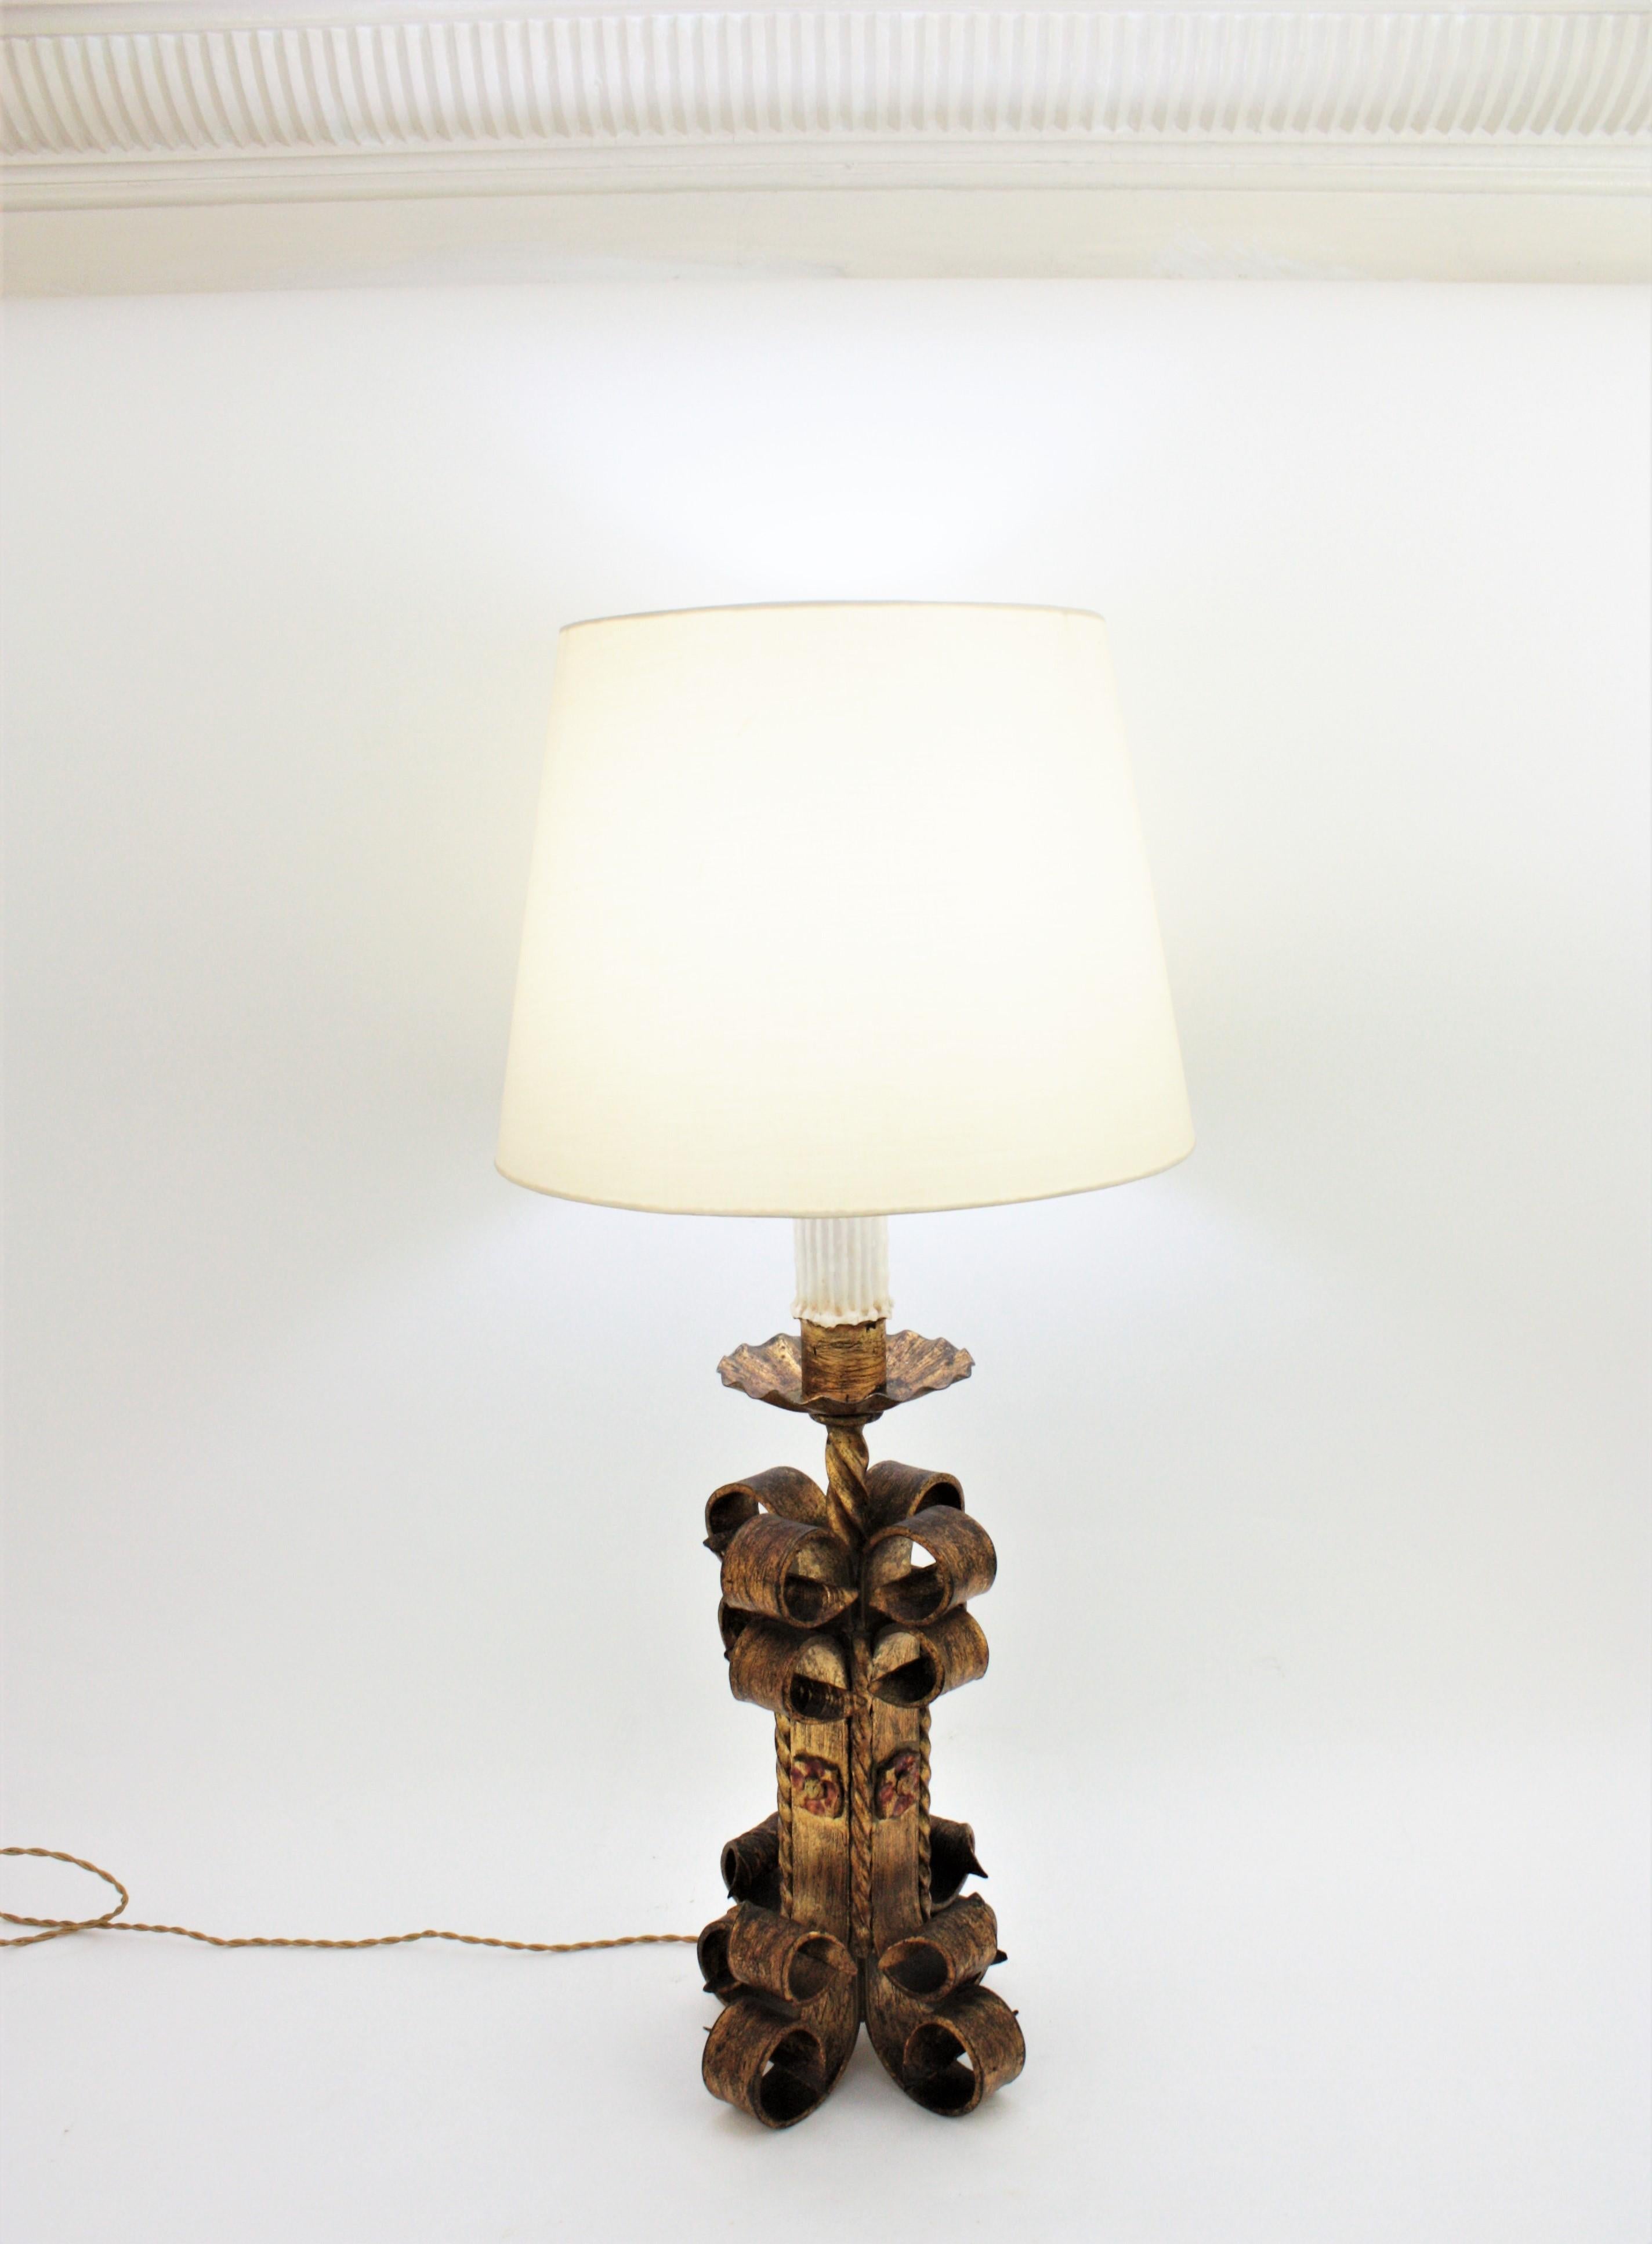 vintage wrought iron table lamps